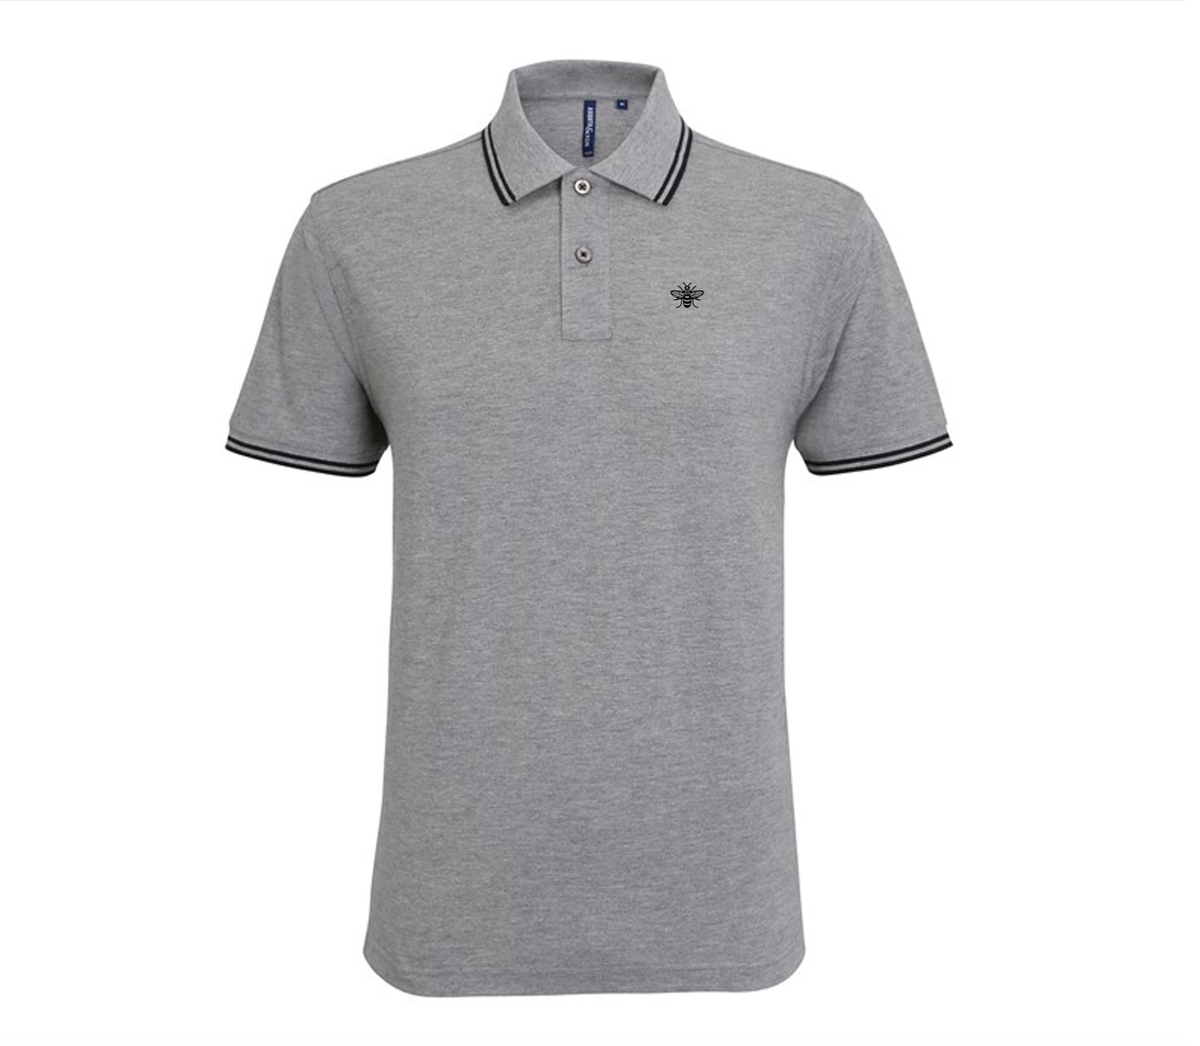 BeeManc Embroidered Bee Tipped Polo - Heather Grey/Black